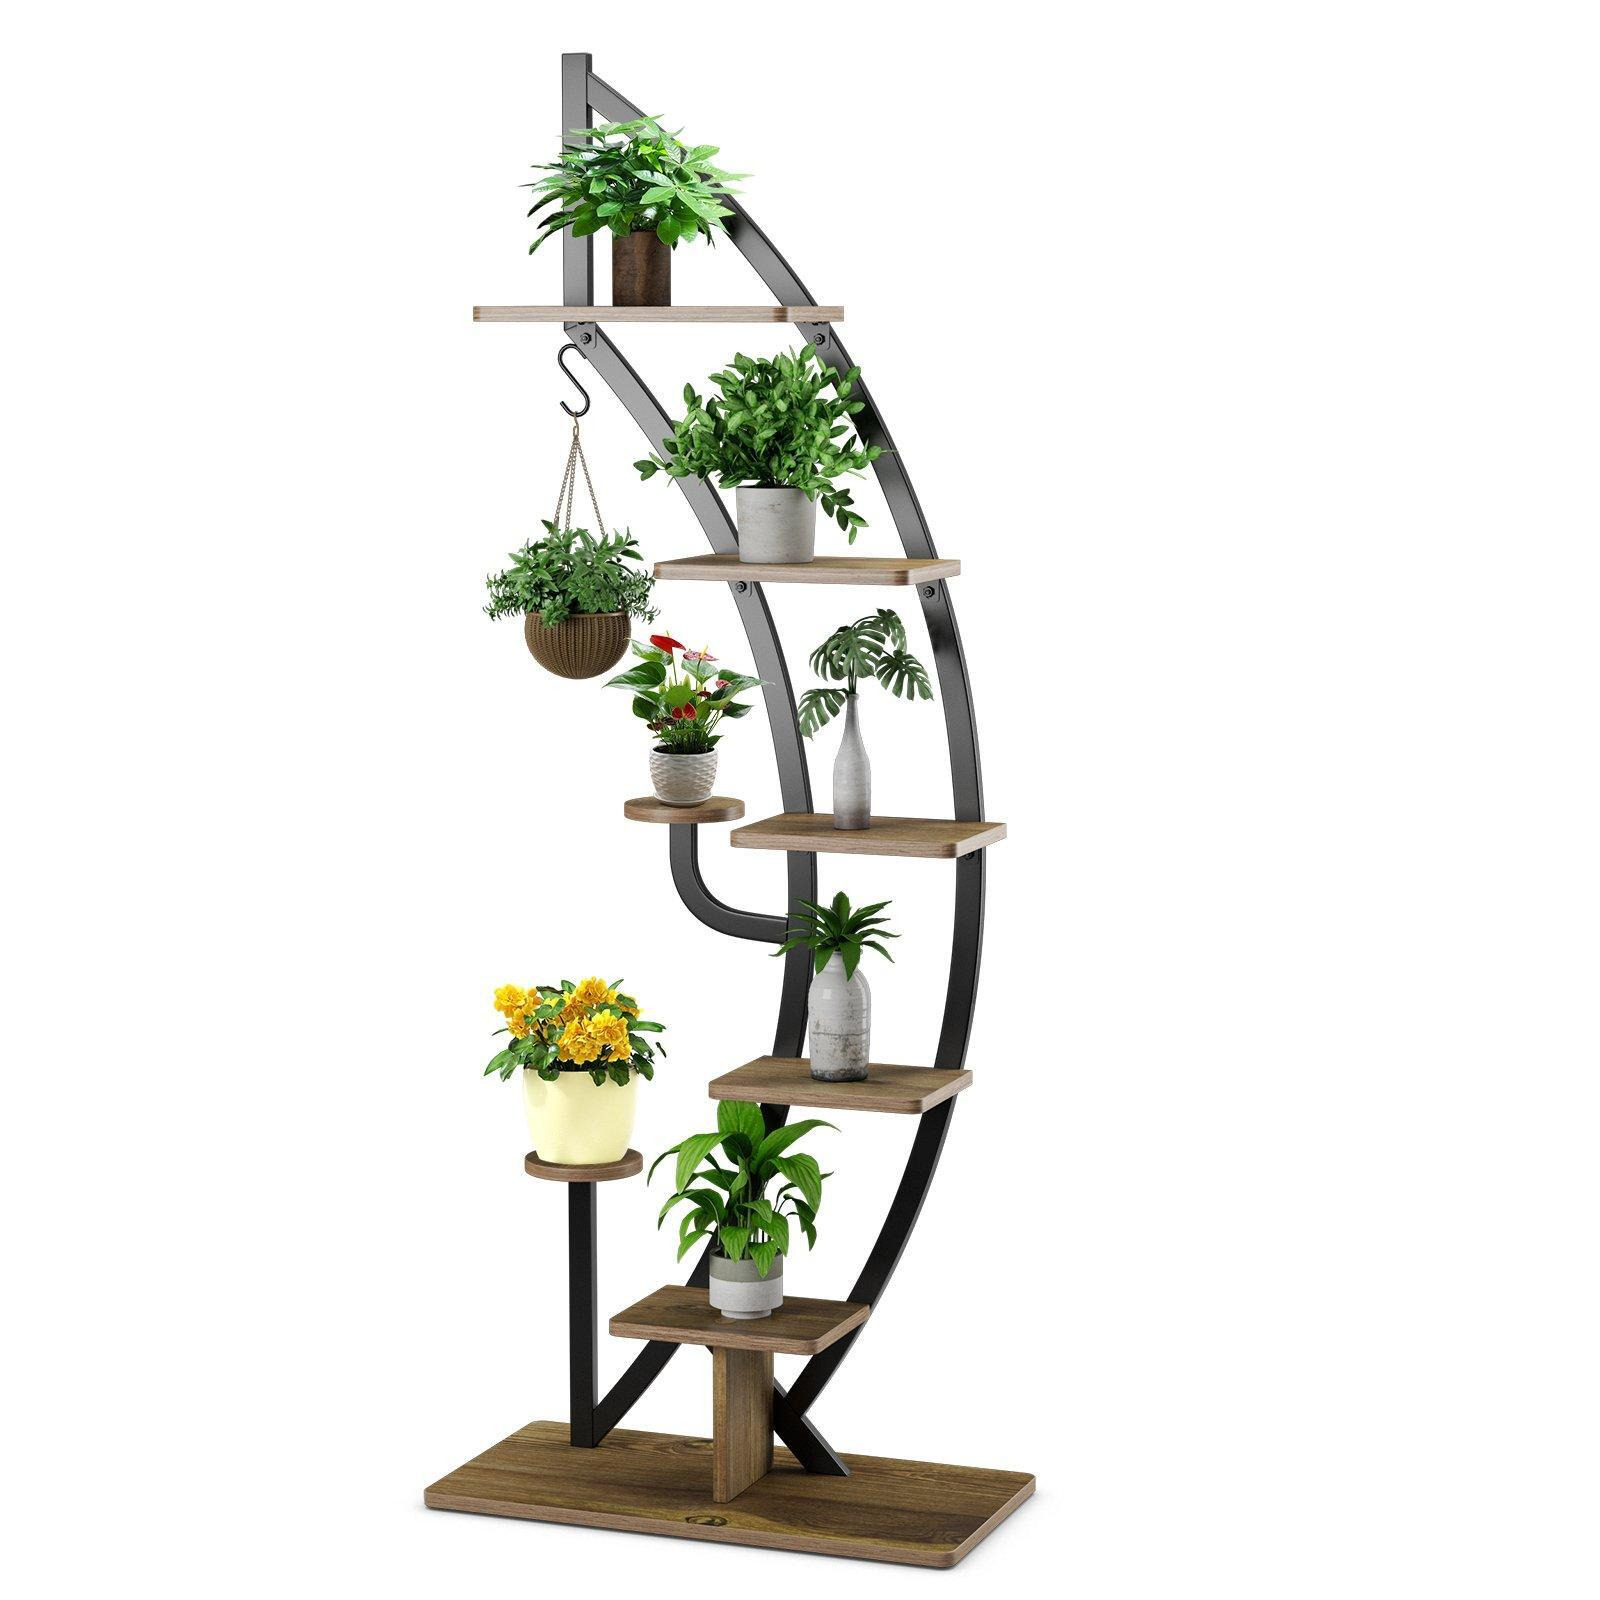 8-Tier Plant Stand Curved Half Moon Shape Ladder Flowers Shelf with Hook - image 1